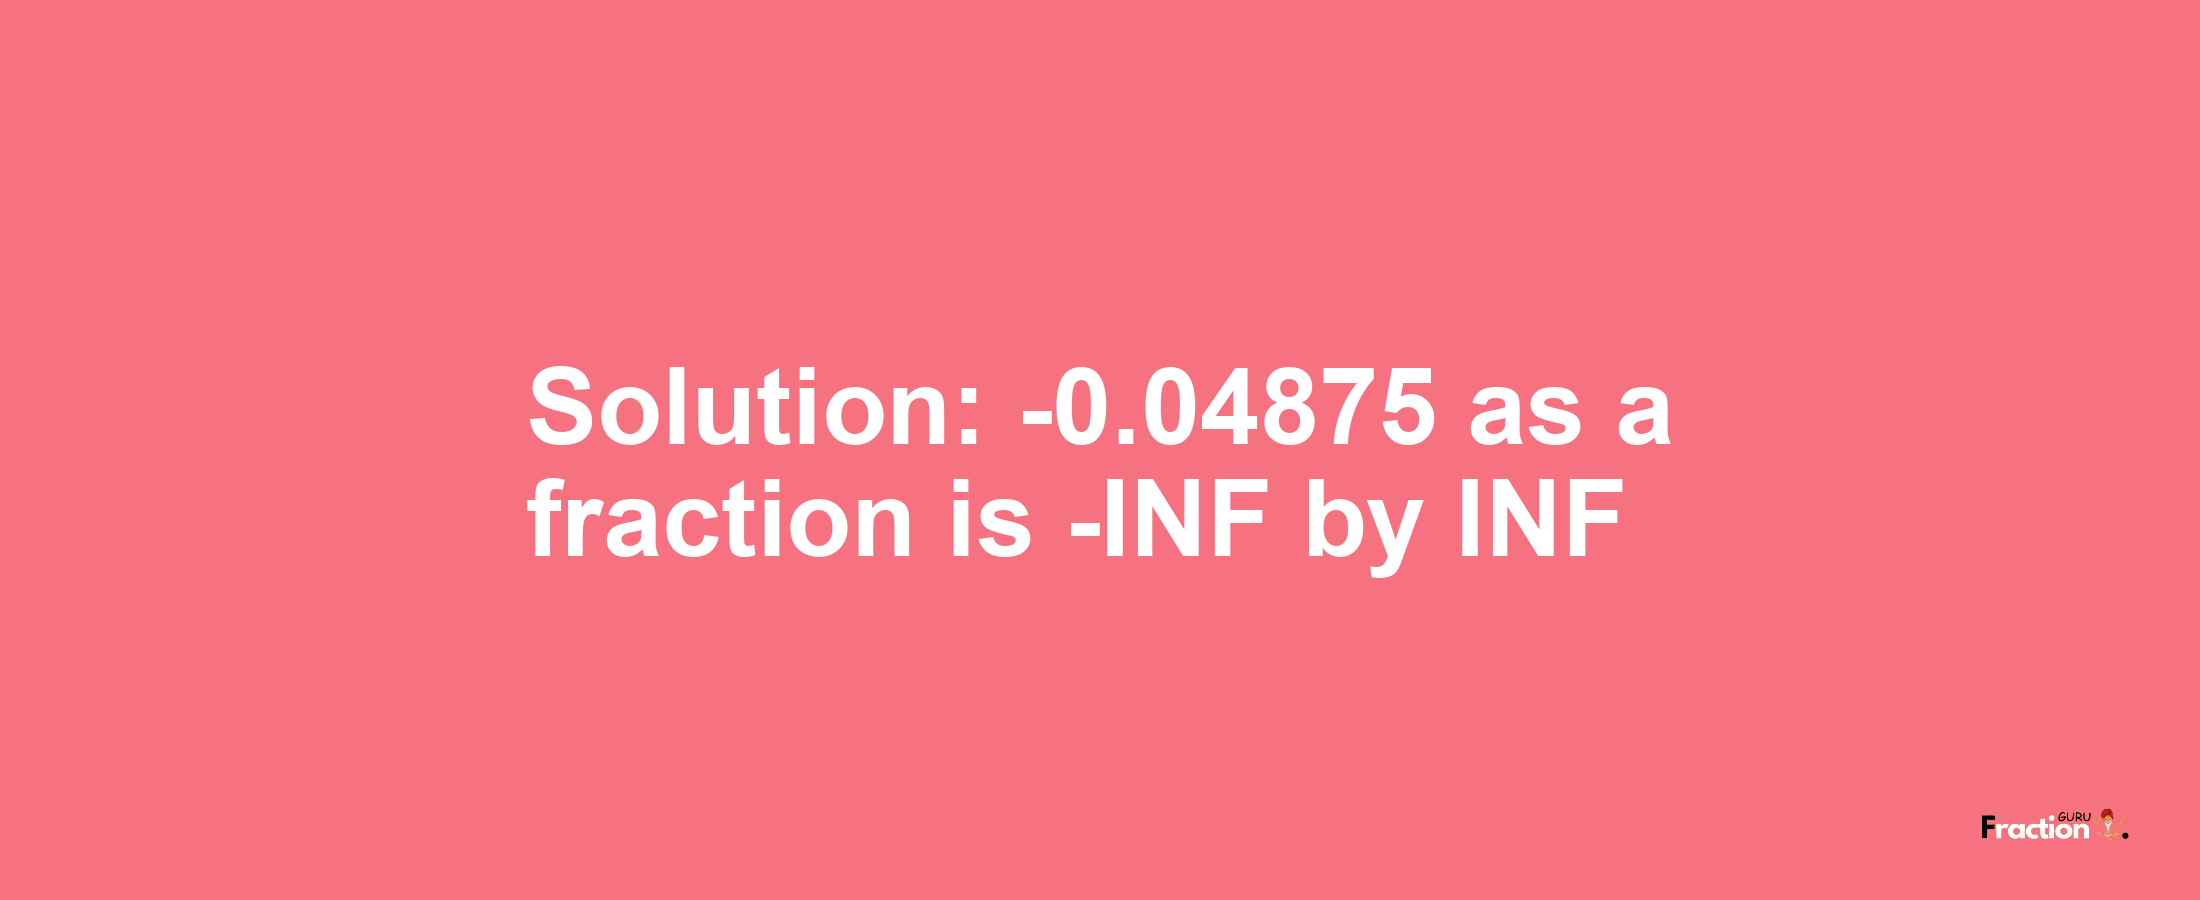 Solution:-0.04875 as a fraction is -INF/INF